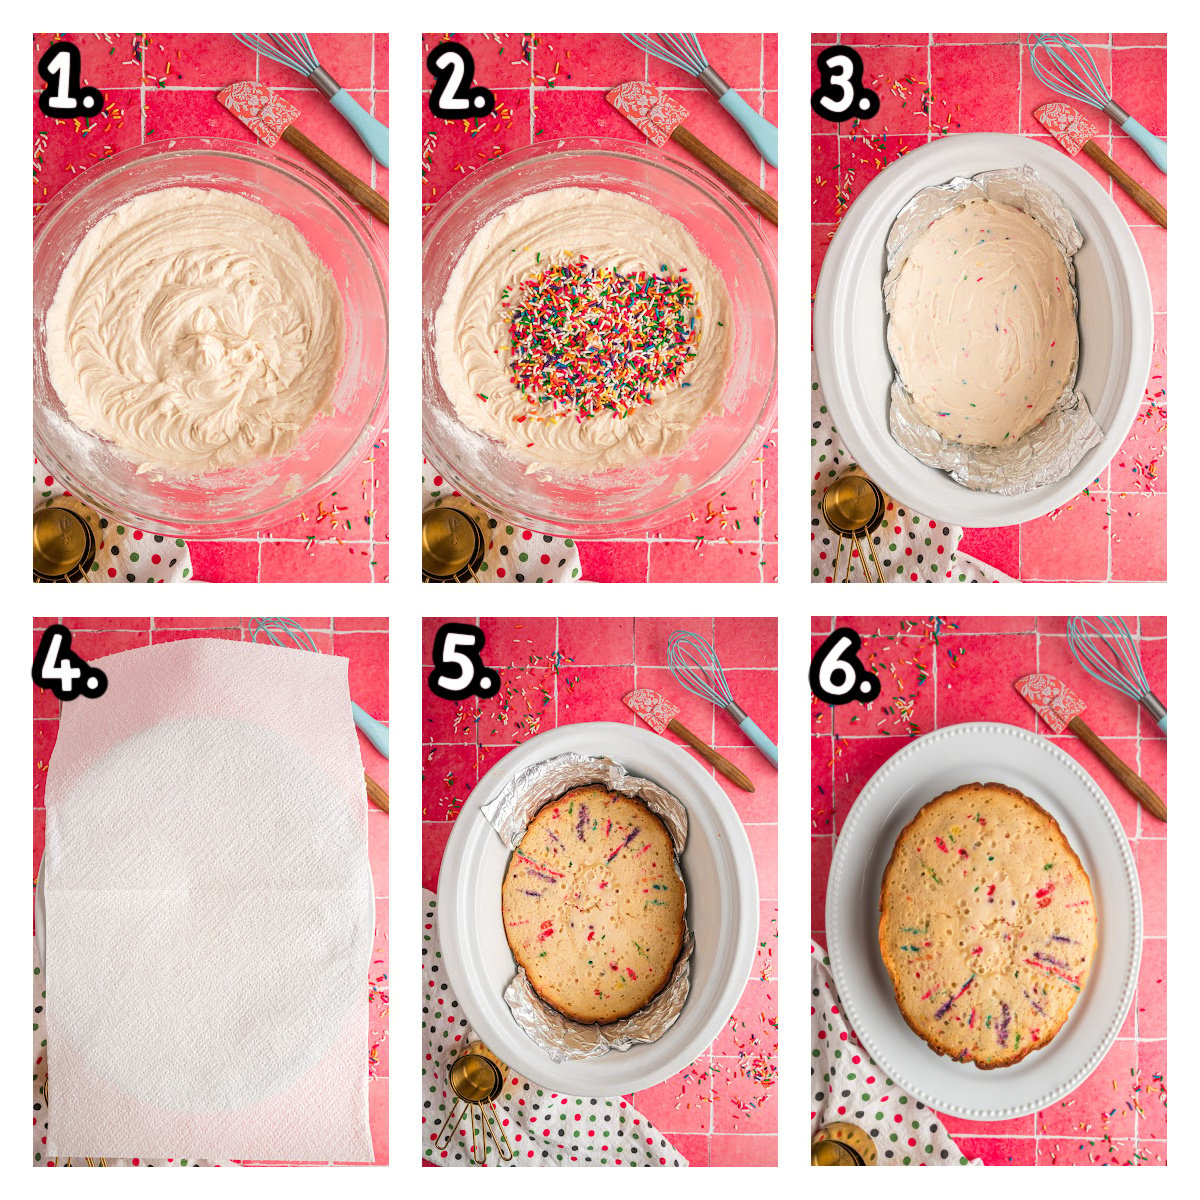 six images showing how to make slow cooker birthday cake.